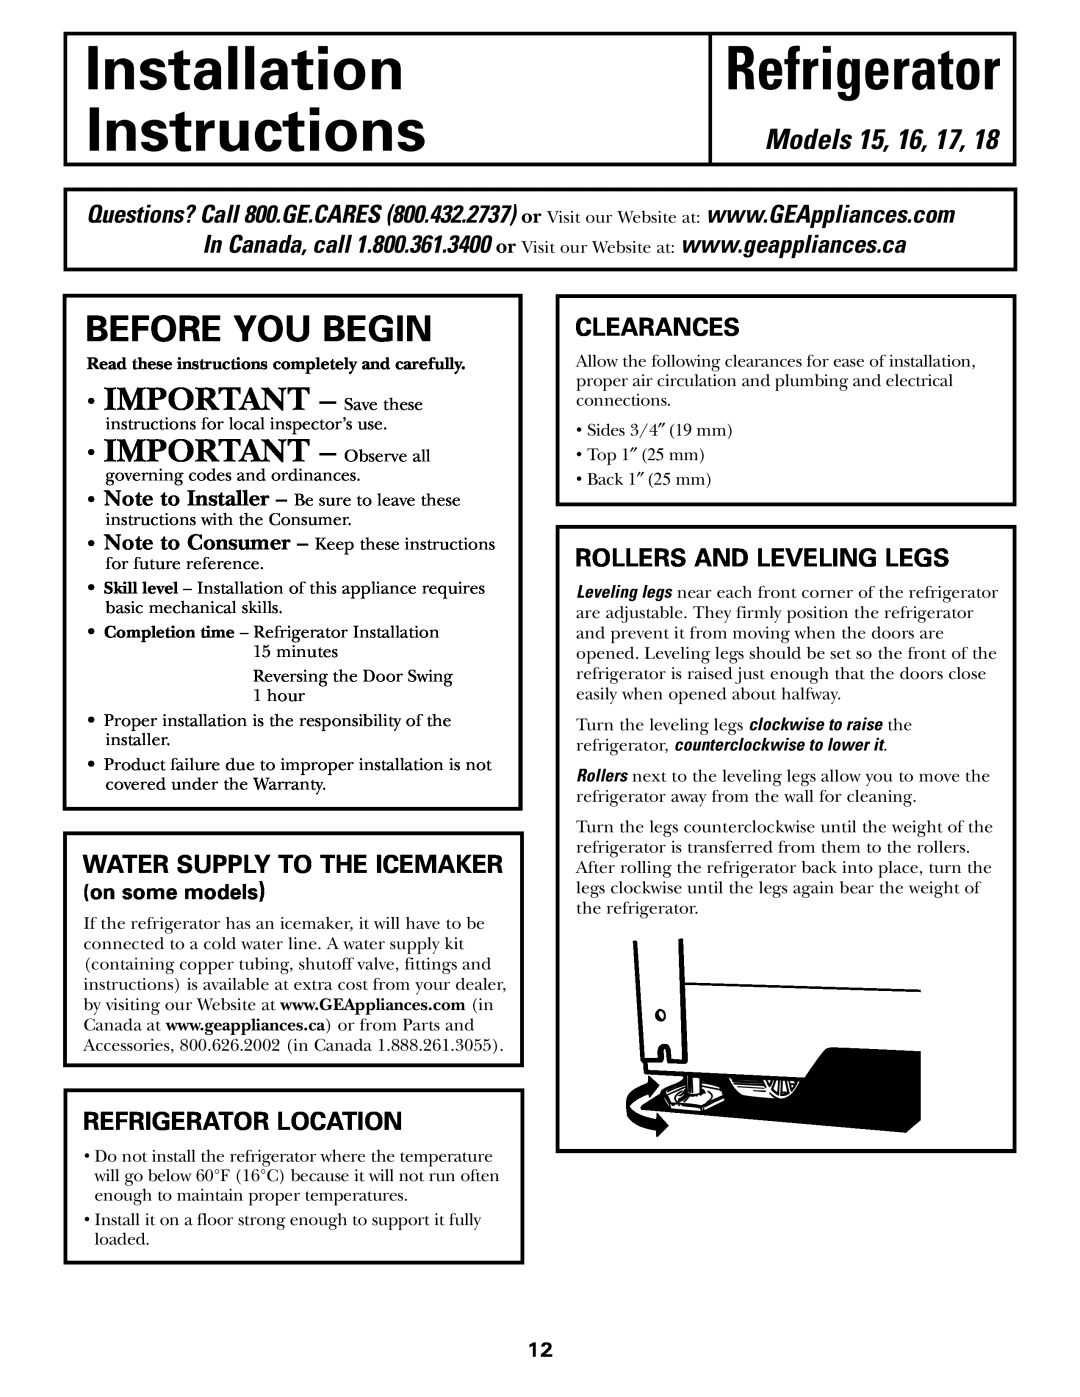 GE 18 installation instructions GEAppliances.com, Safety Instructions Operating Instructions, Installation Instructions 